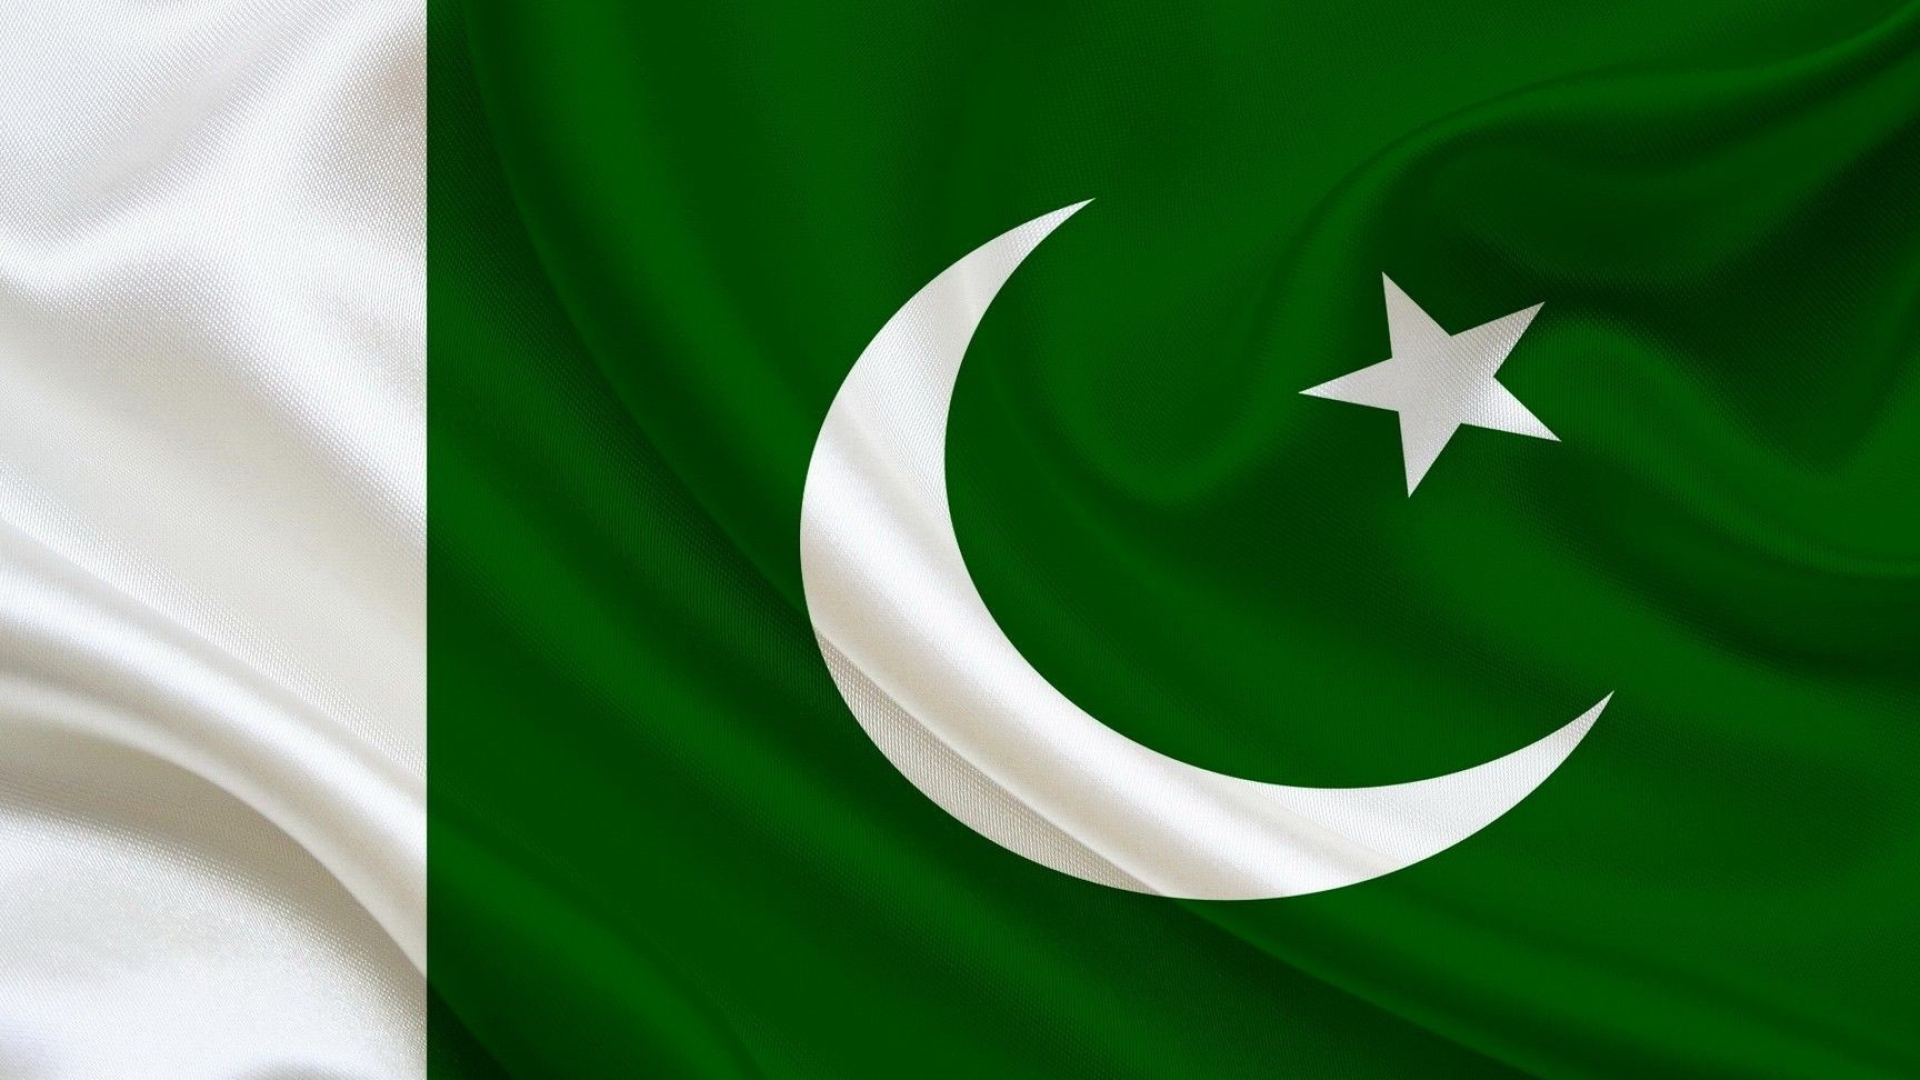 Flag: The symbol of Pakistan, Crescent moon and five-pointed star. 1920x1080 Full HD Wallpaper.